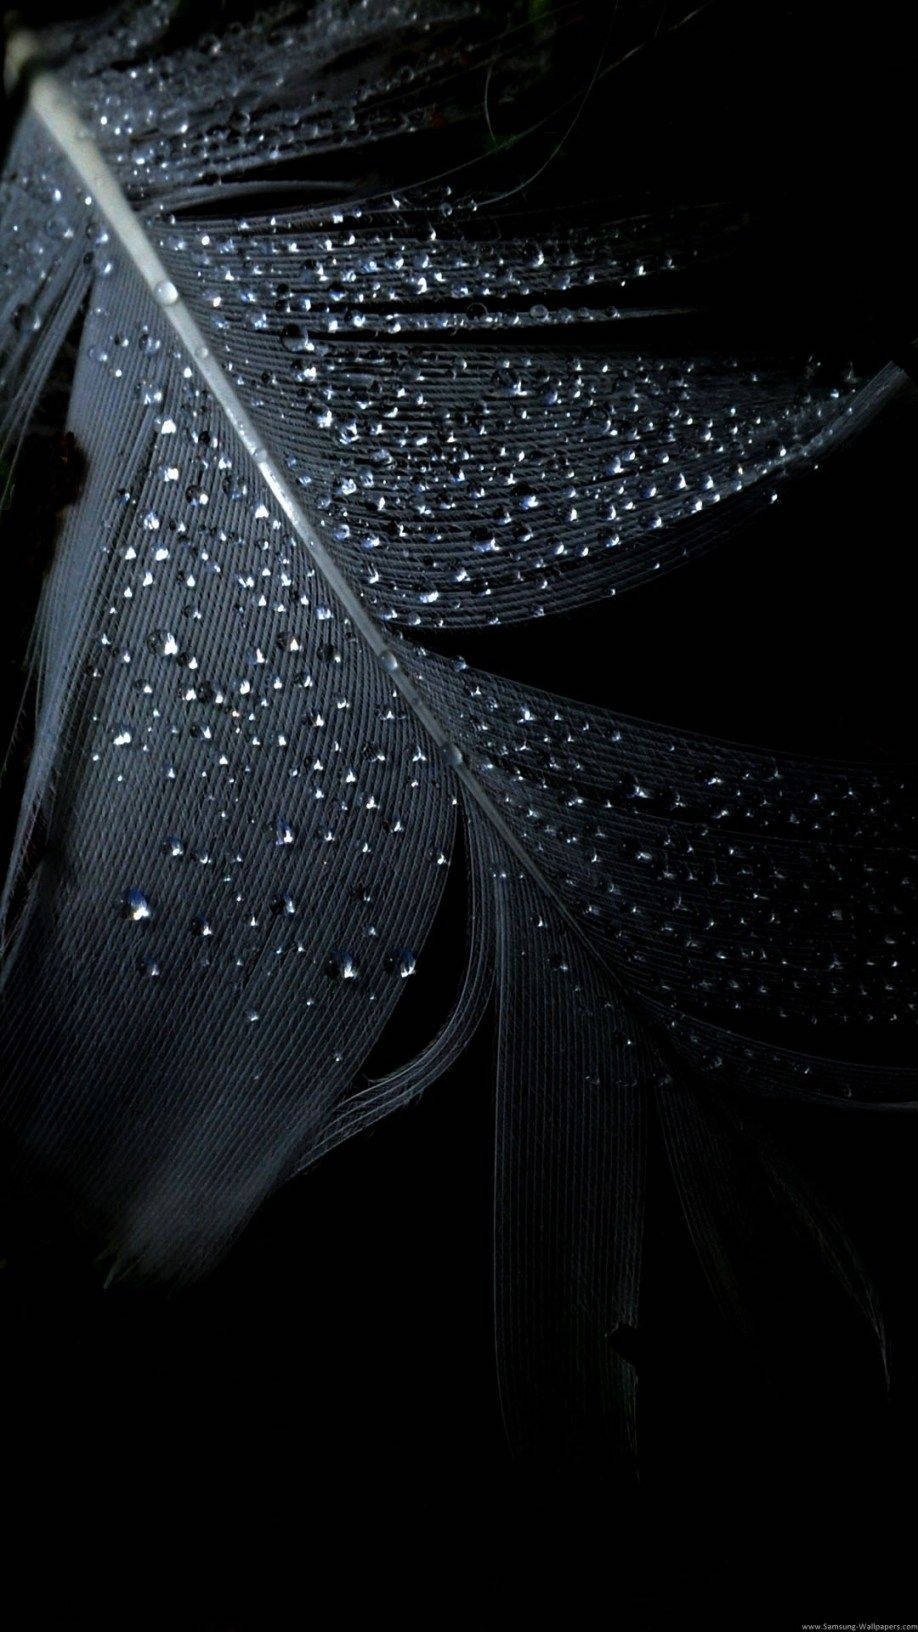 A black feather with water droplets on it - Dark phone